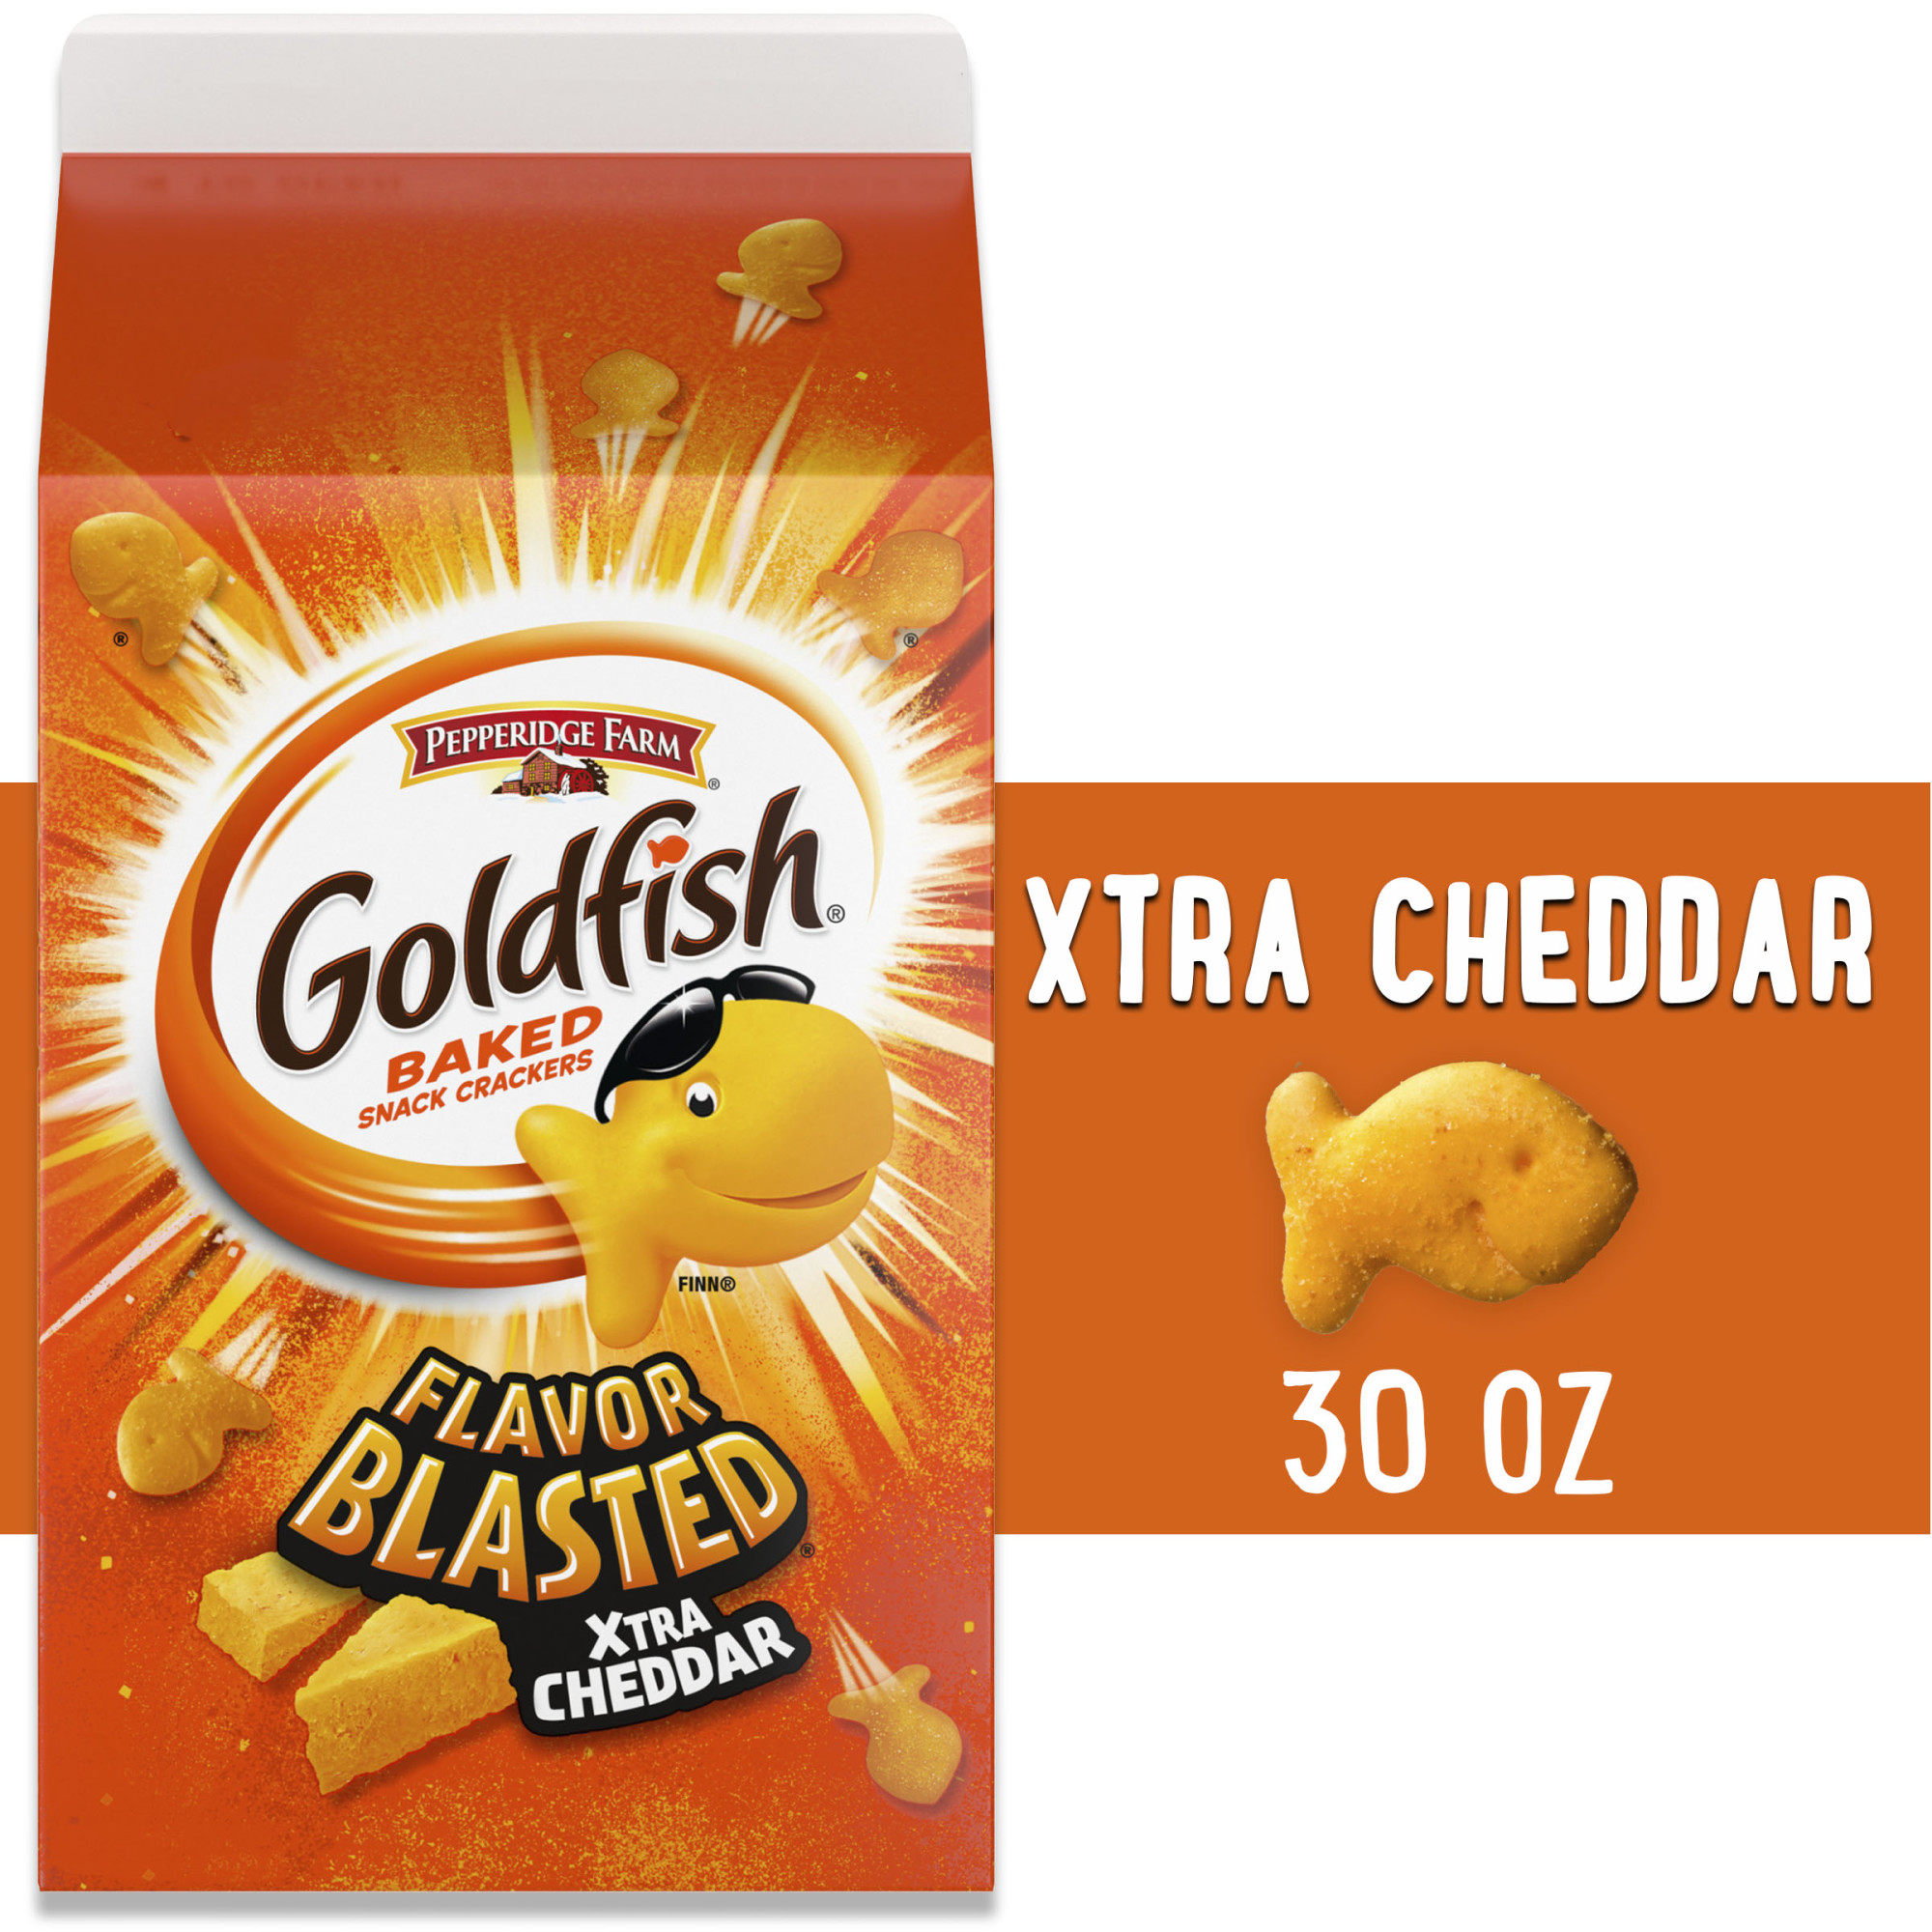 Goldfish Flavor Blasted Xtra Cheddar Cheese Crackers, Baked Snack Crackers, 30 oz Carton - image 1 of 12